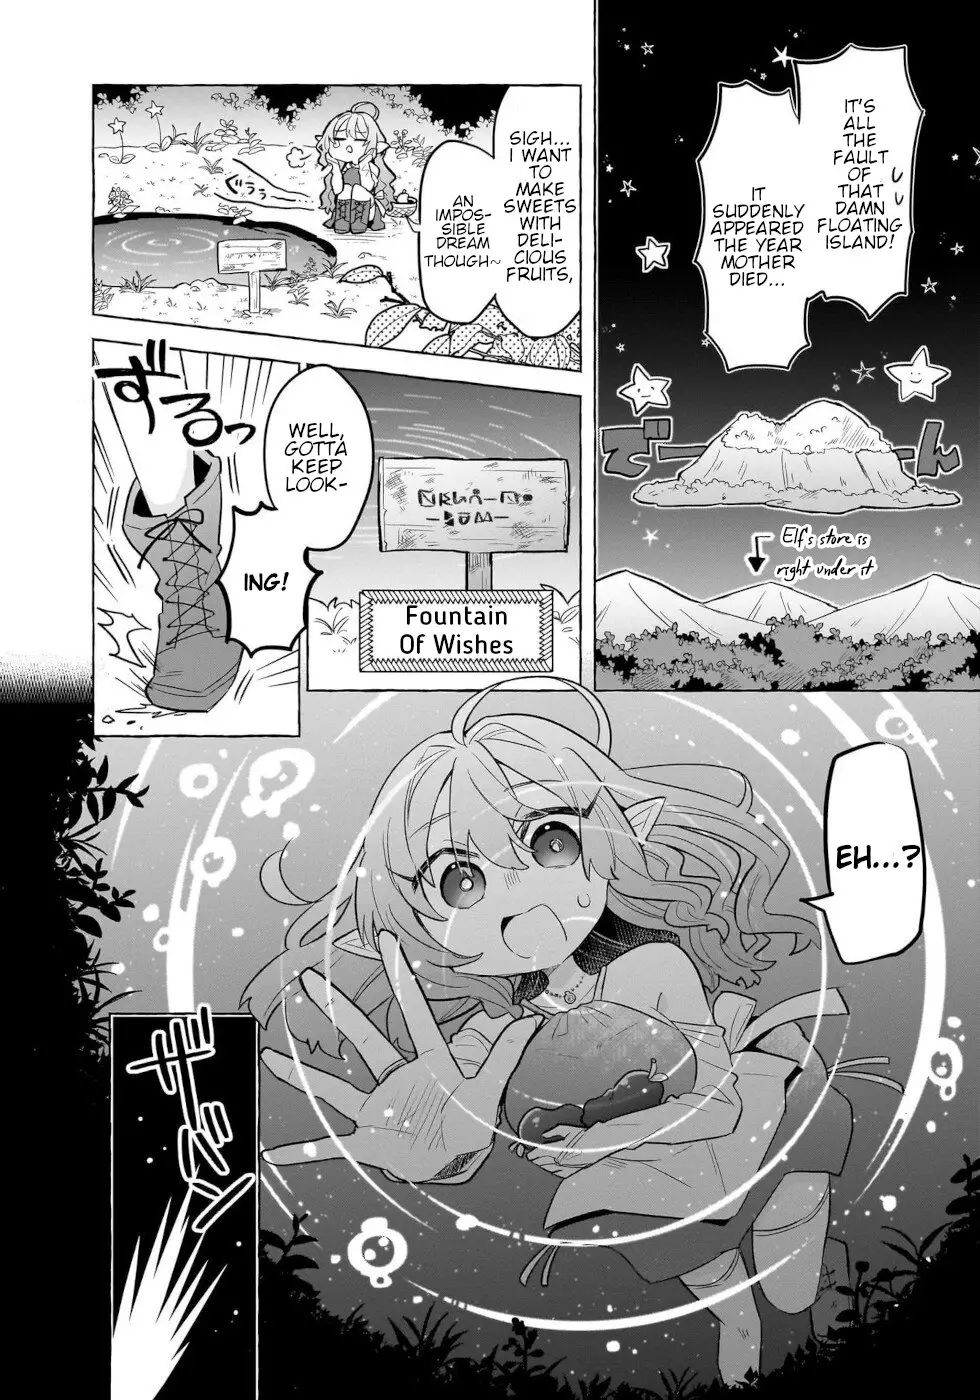 Sweets, Elf, And A High School Girl - 1 page 9-5425cea7